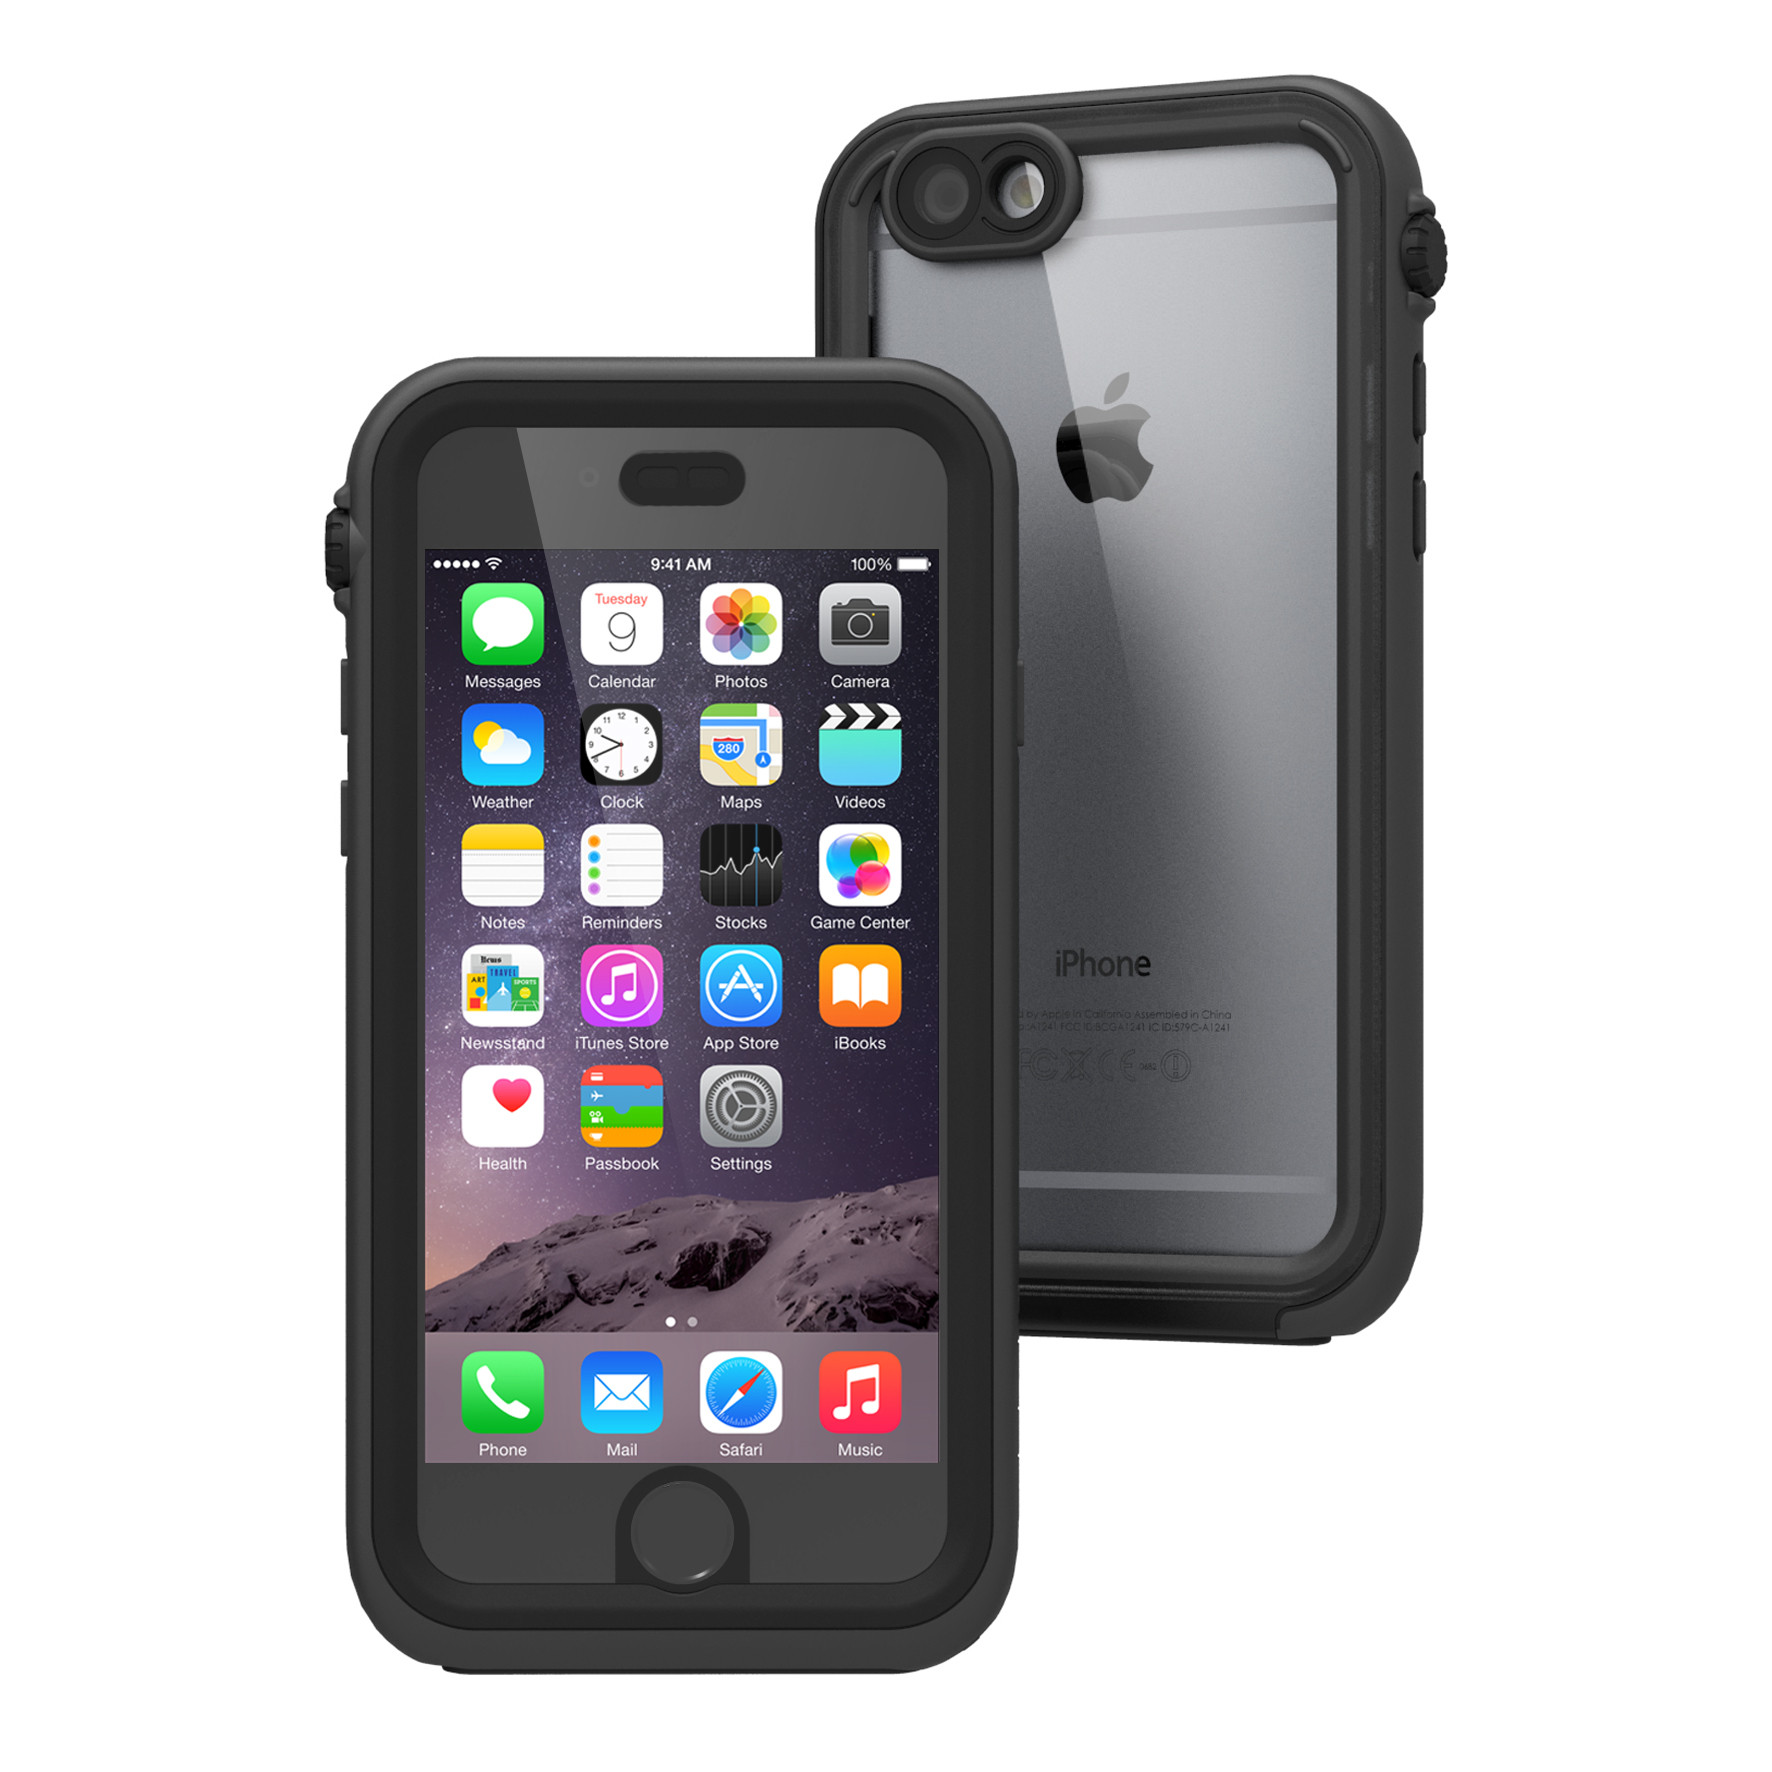 photo of Catalyst Waterproof case protects your iPhone 6 up to 16 feet under water image